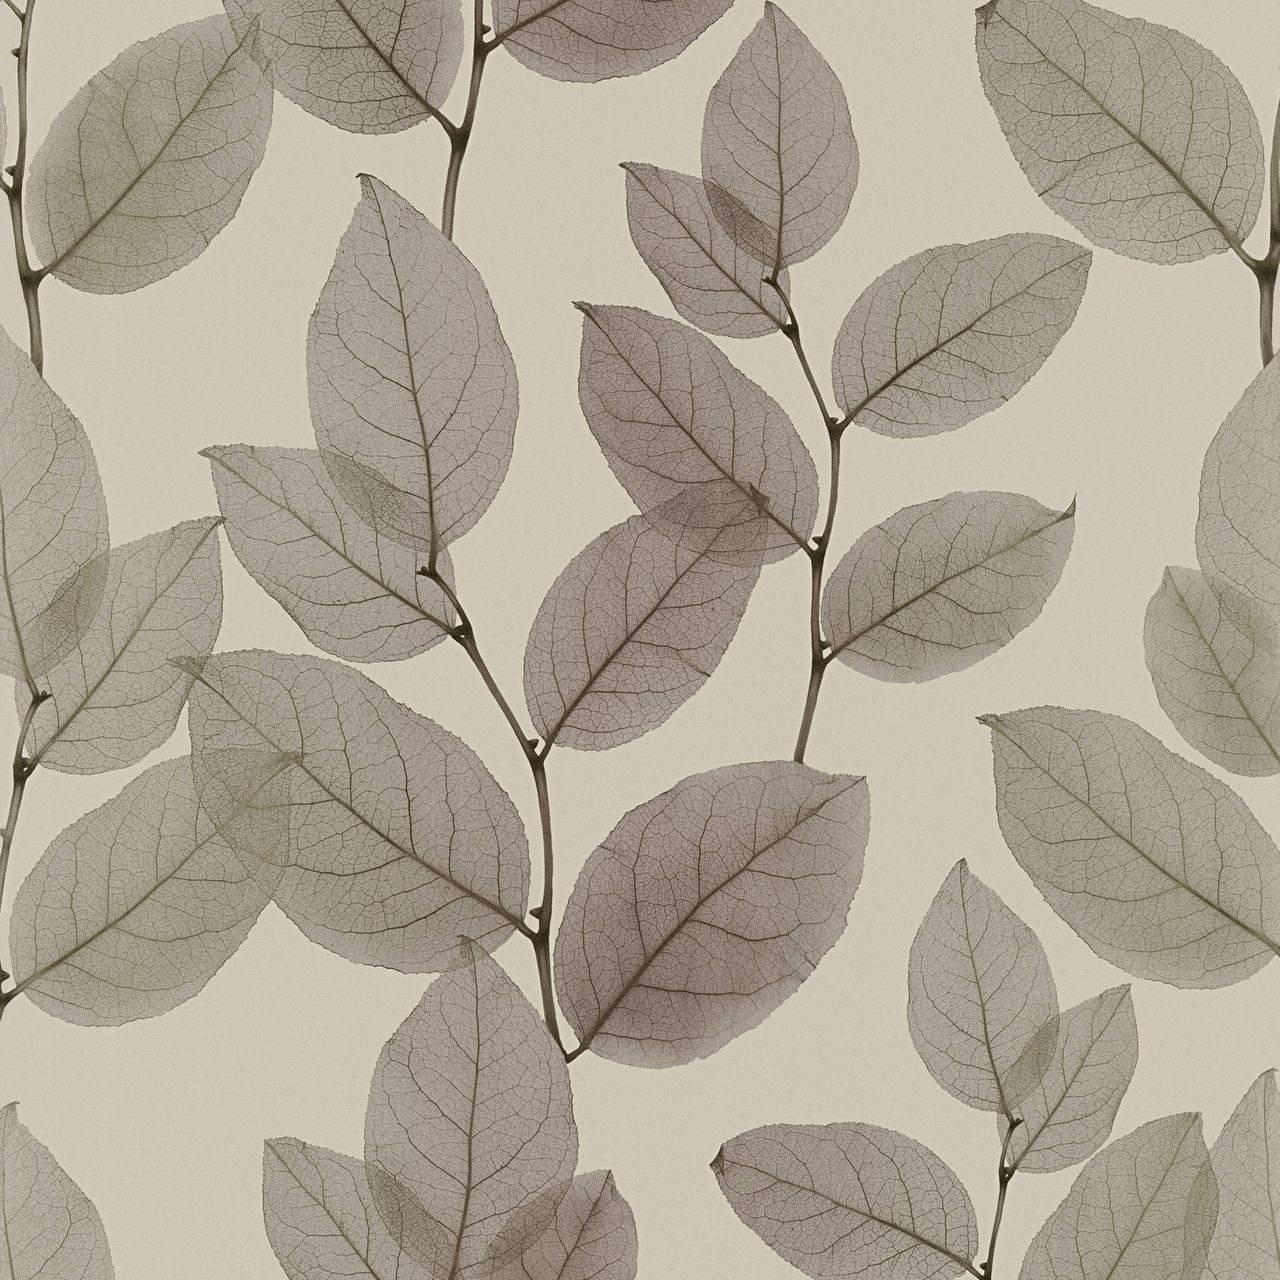 Muted greyscale leaf, the perfect backdrop for any surface. Wallpaper